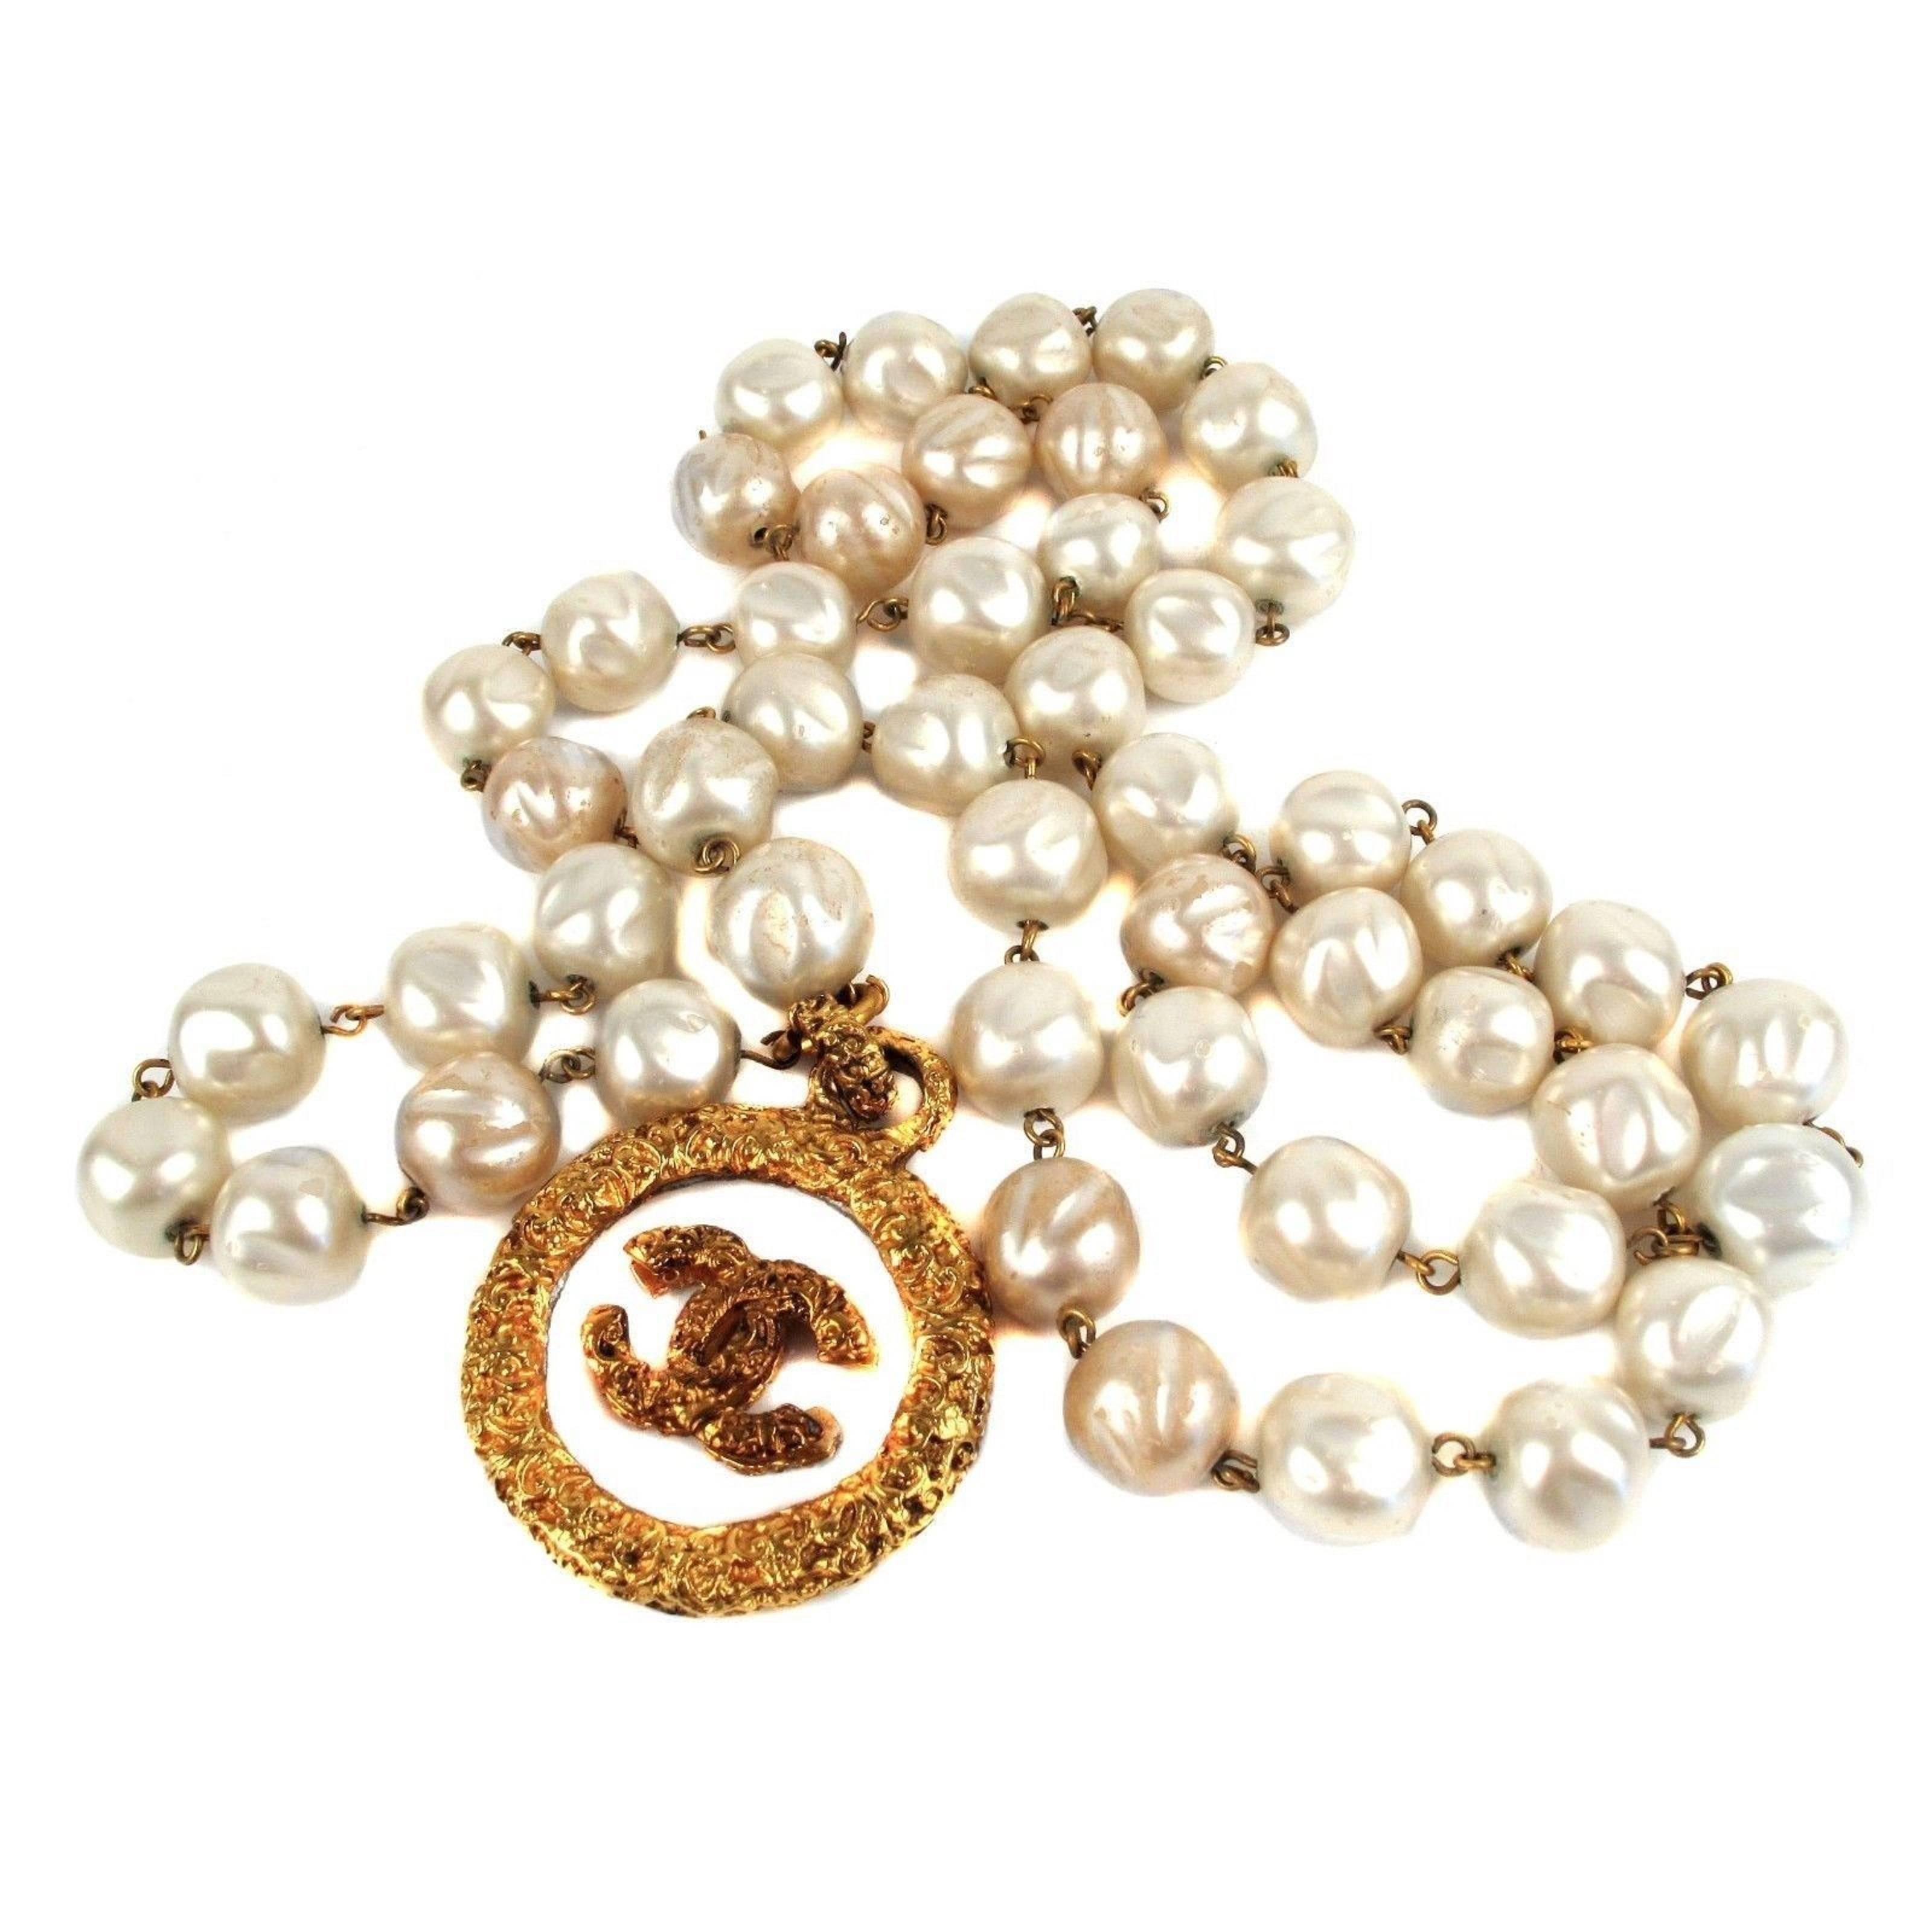 1993 Chanel Glass Pearl Necklace with CC Logo Drop